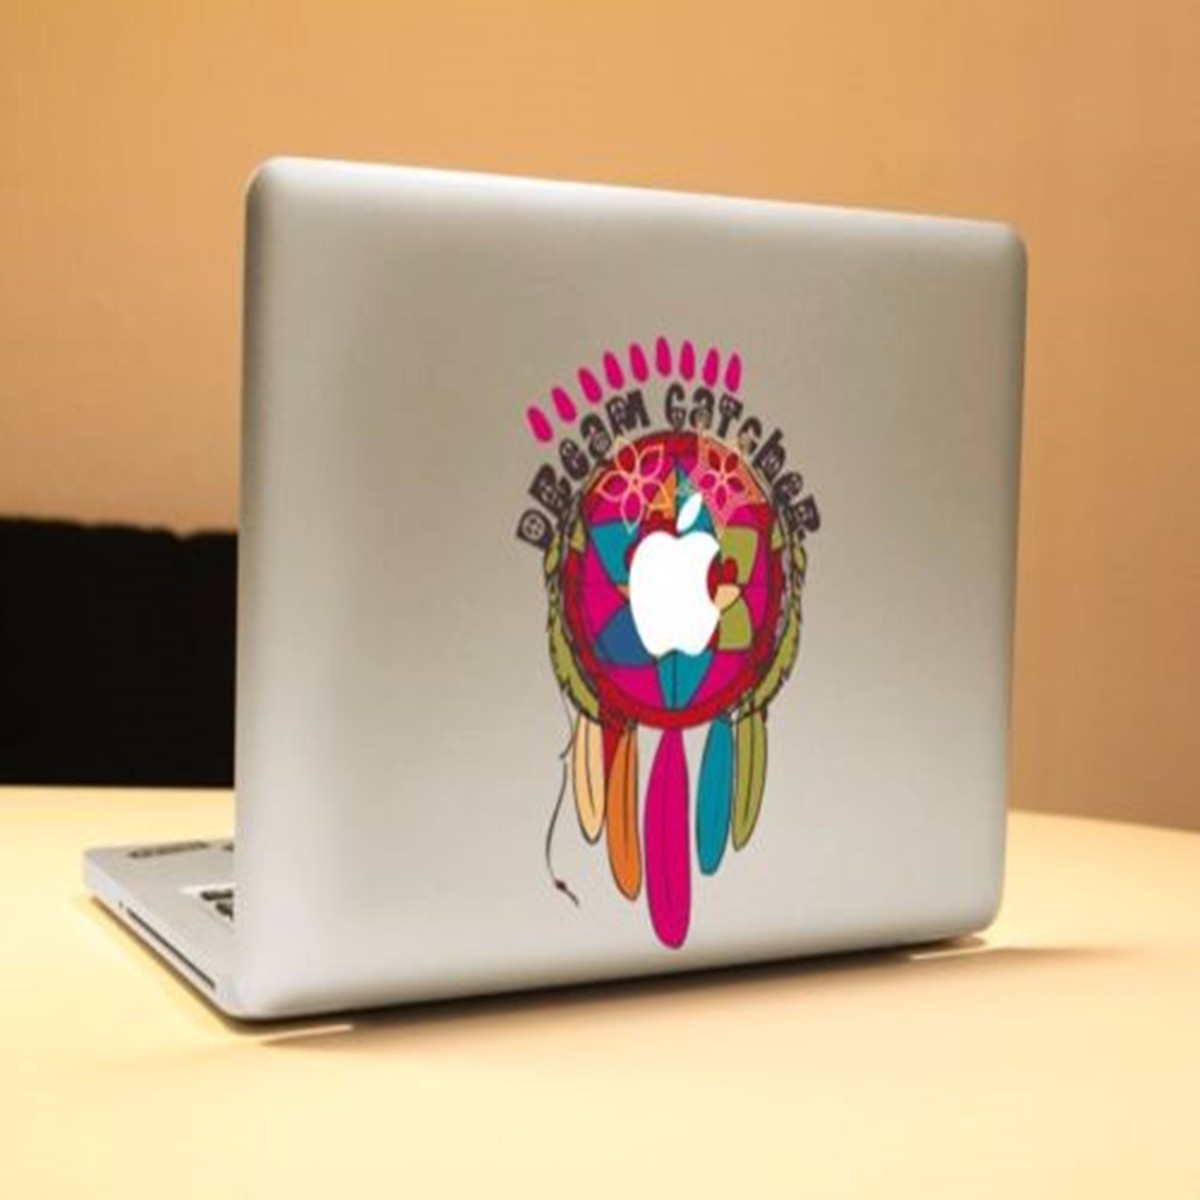 Indian-Feathers-Thin-Vinyl-Digital-Sticker-Skin-Decals-Cover-Laptop-Skin-For-Apple-Macbook-1033101-1